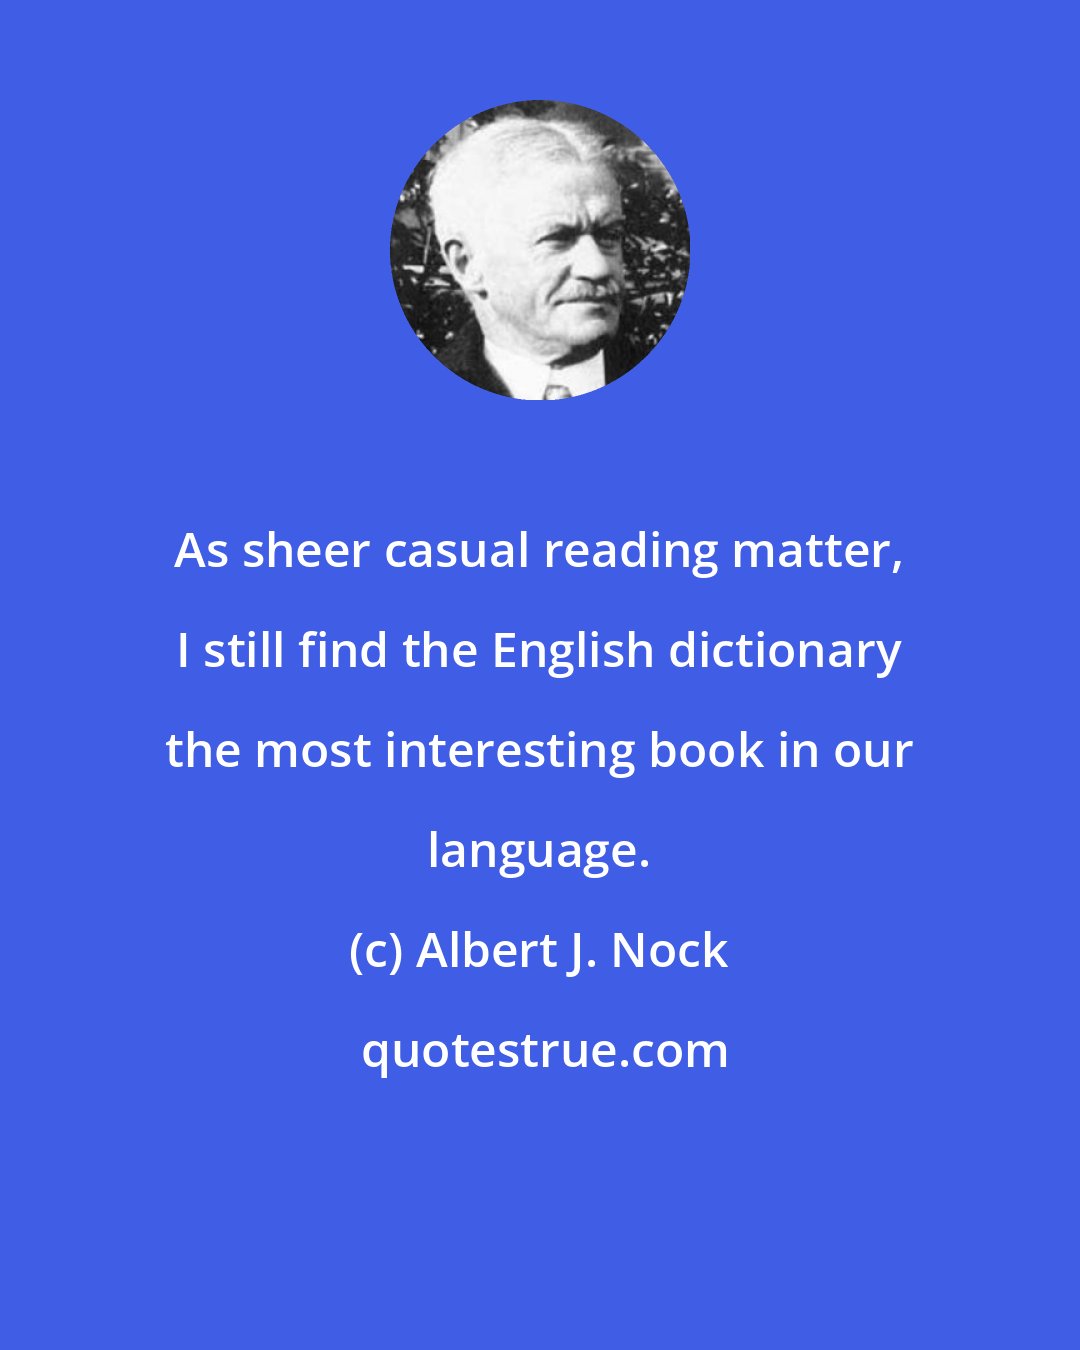 Albert J. Nock: As sheer casual reading matter, I still find the English dictionary the most interesting book in our language.